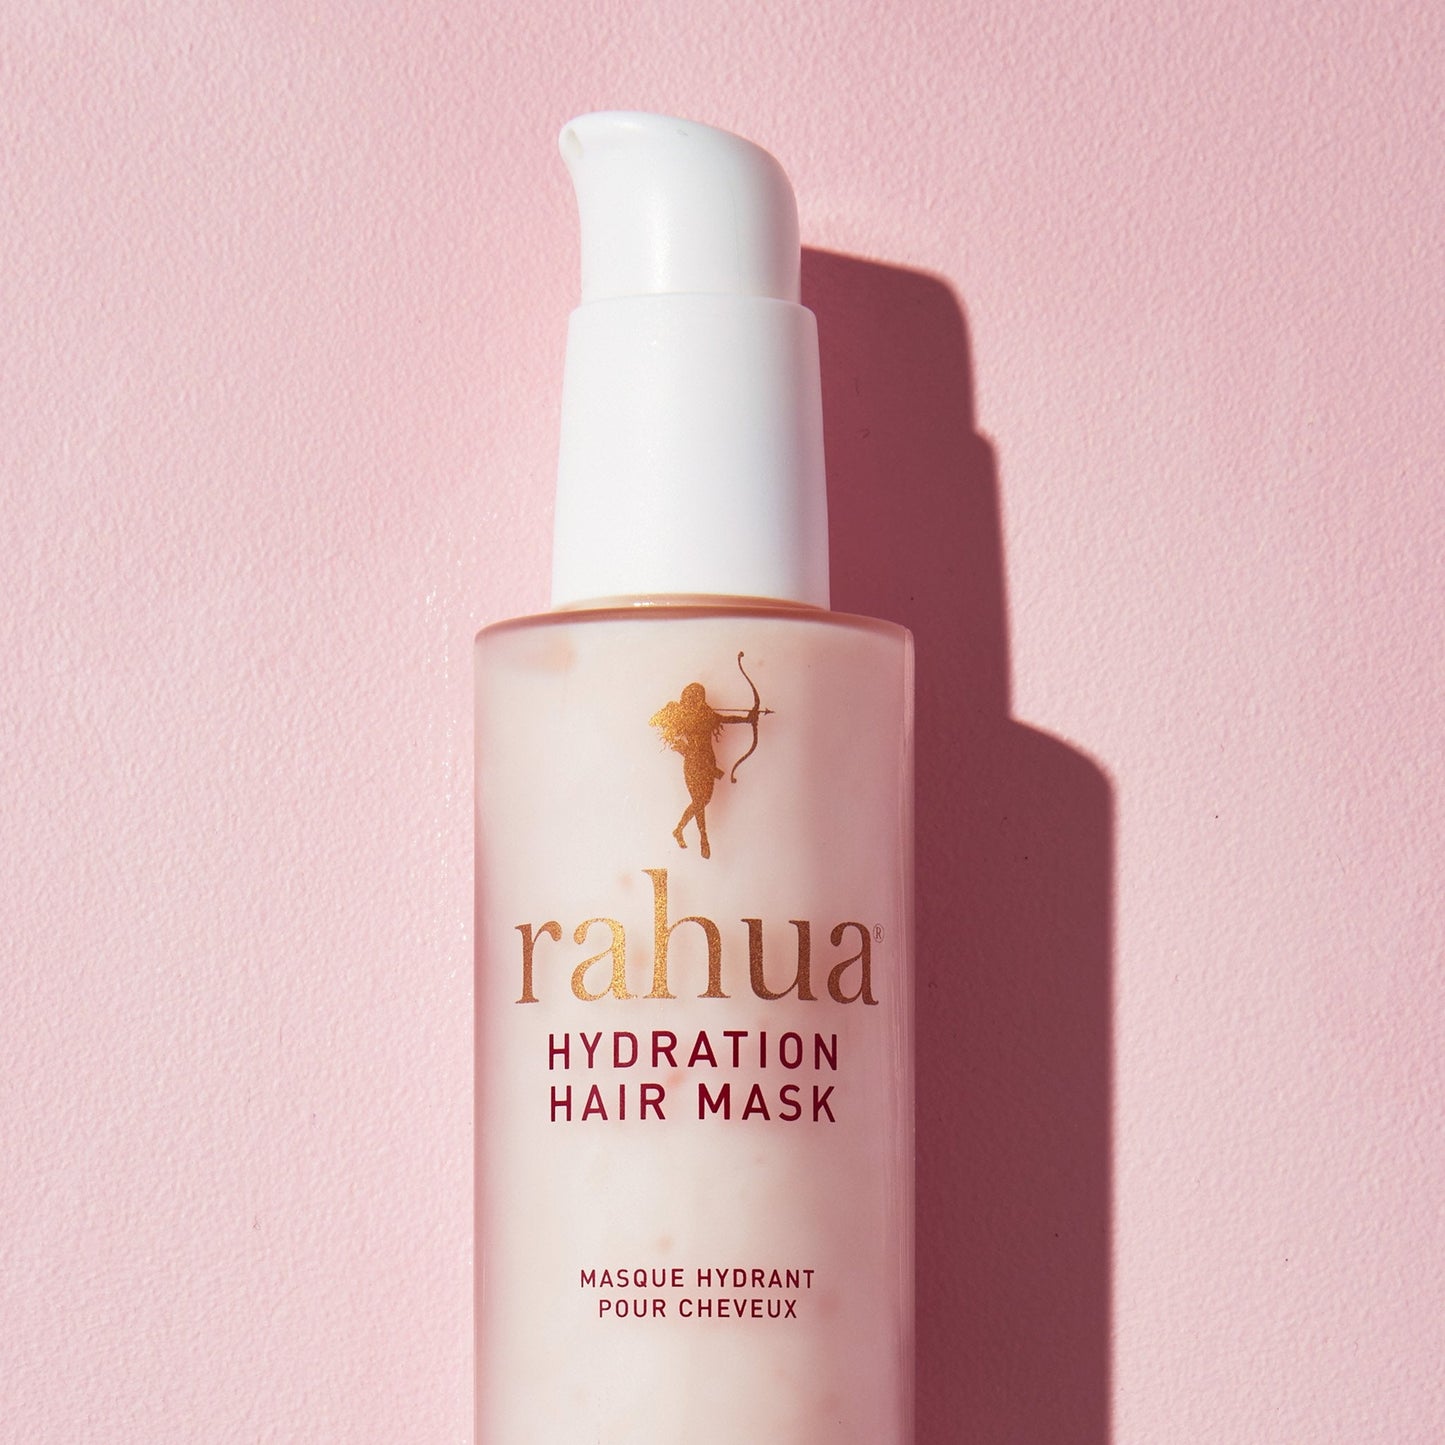 Rahua Hydration Hair Mask with pink